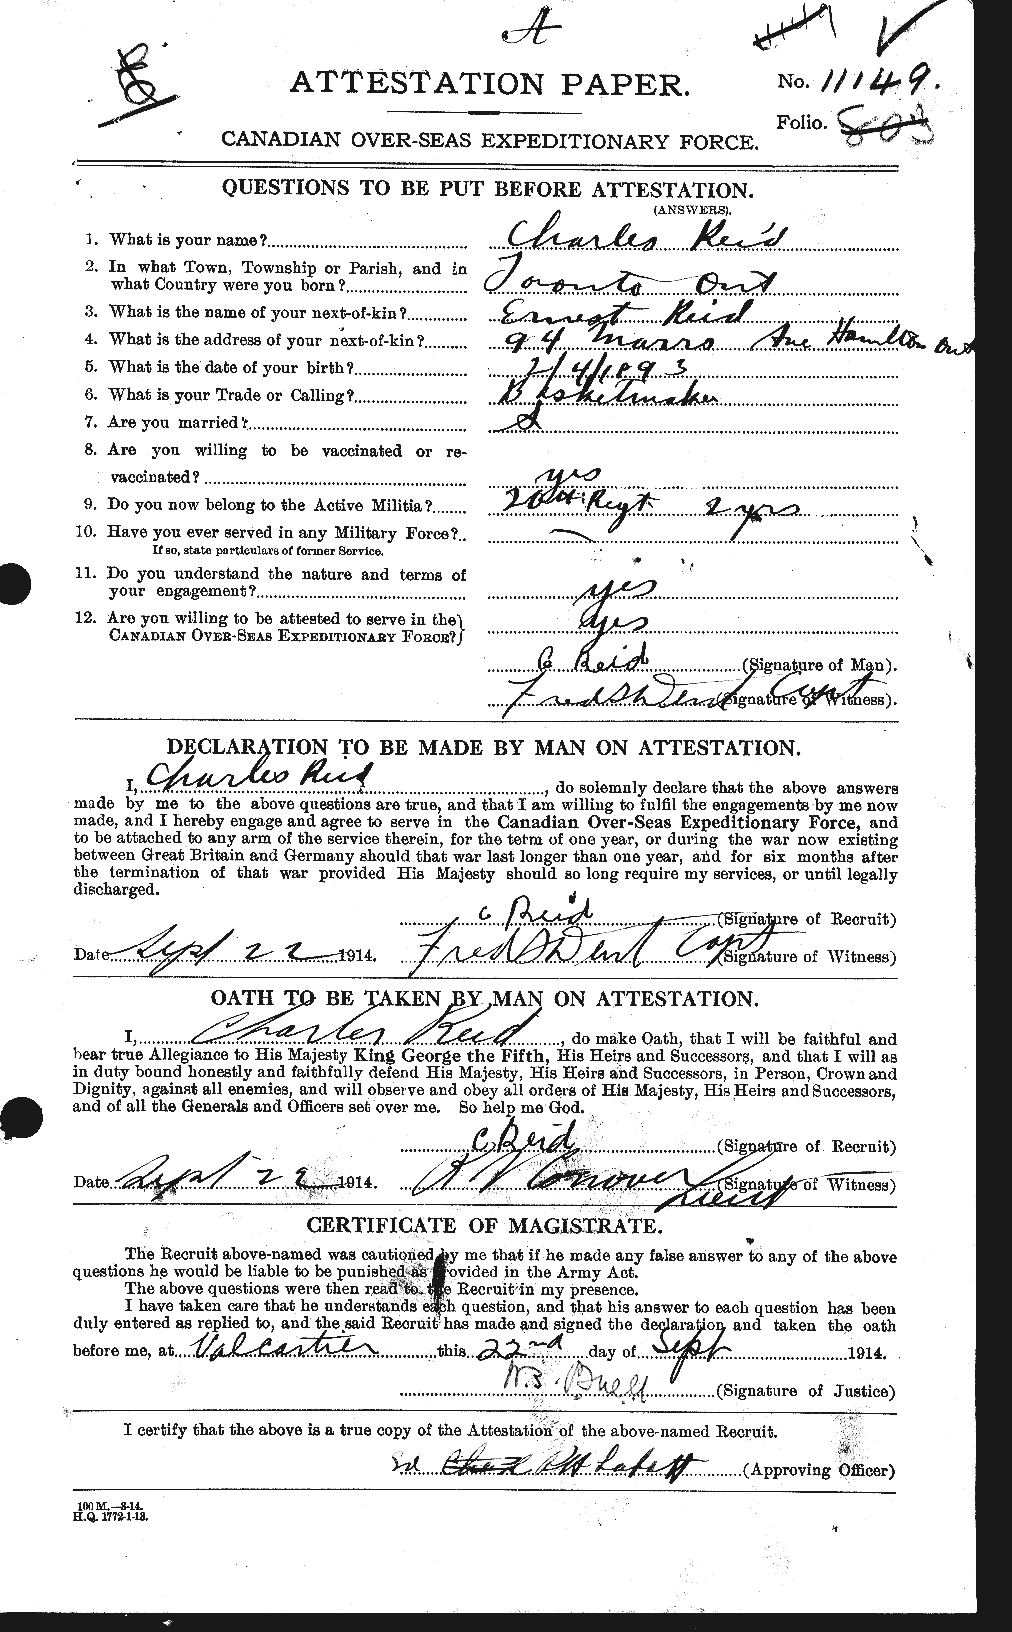 Personnel Records of the First World War - CEF 597871a